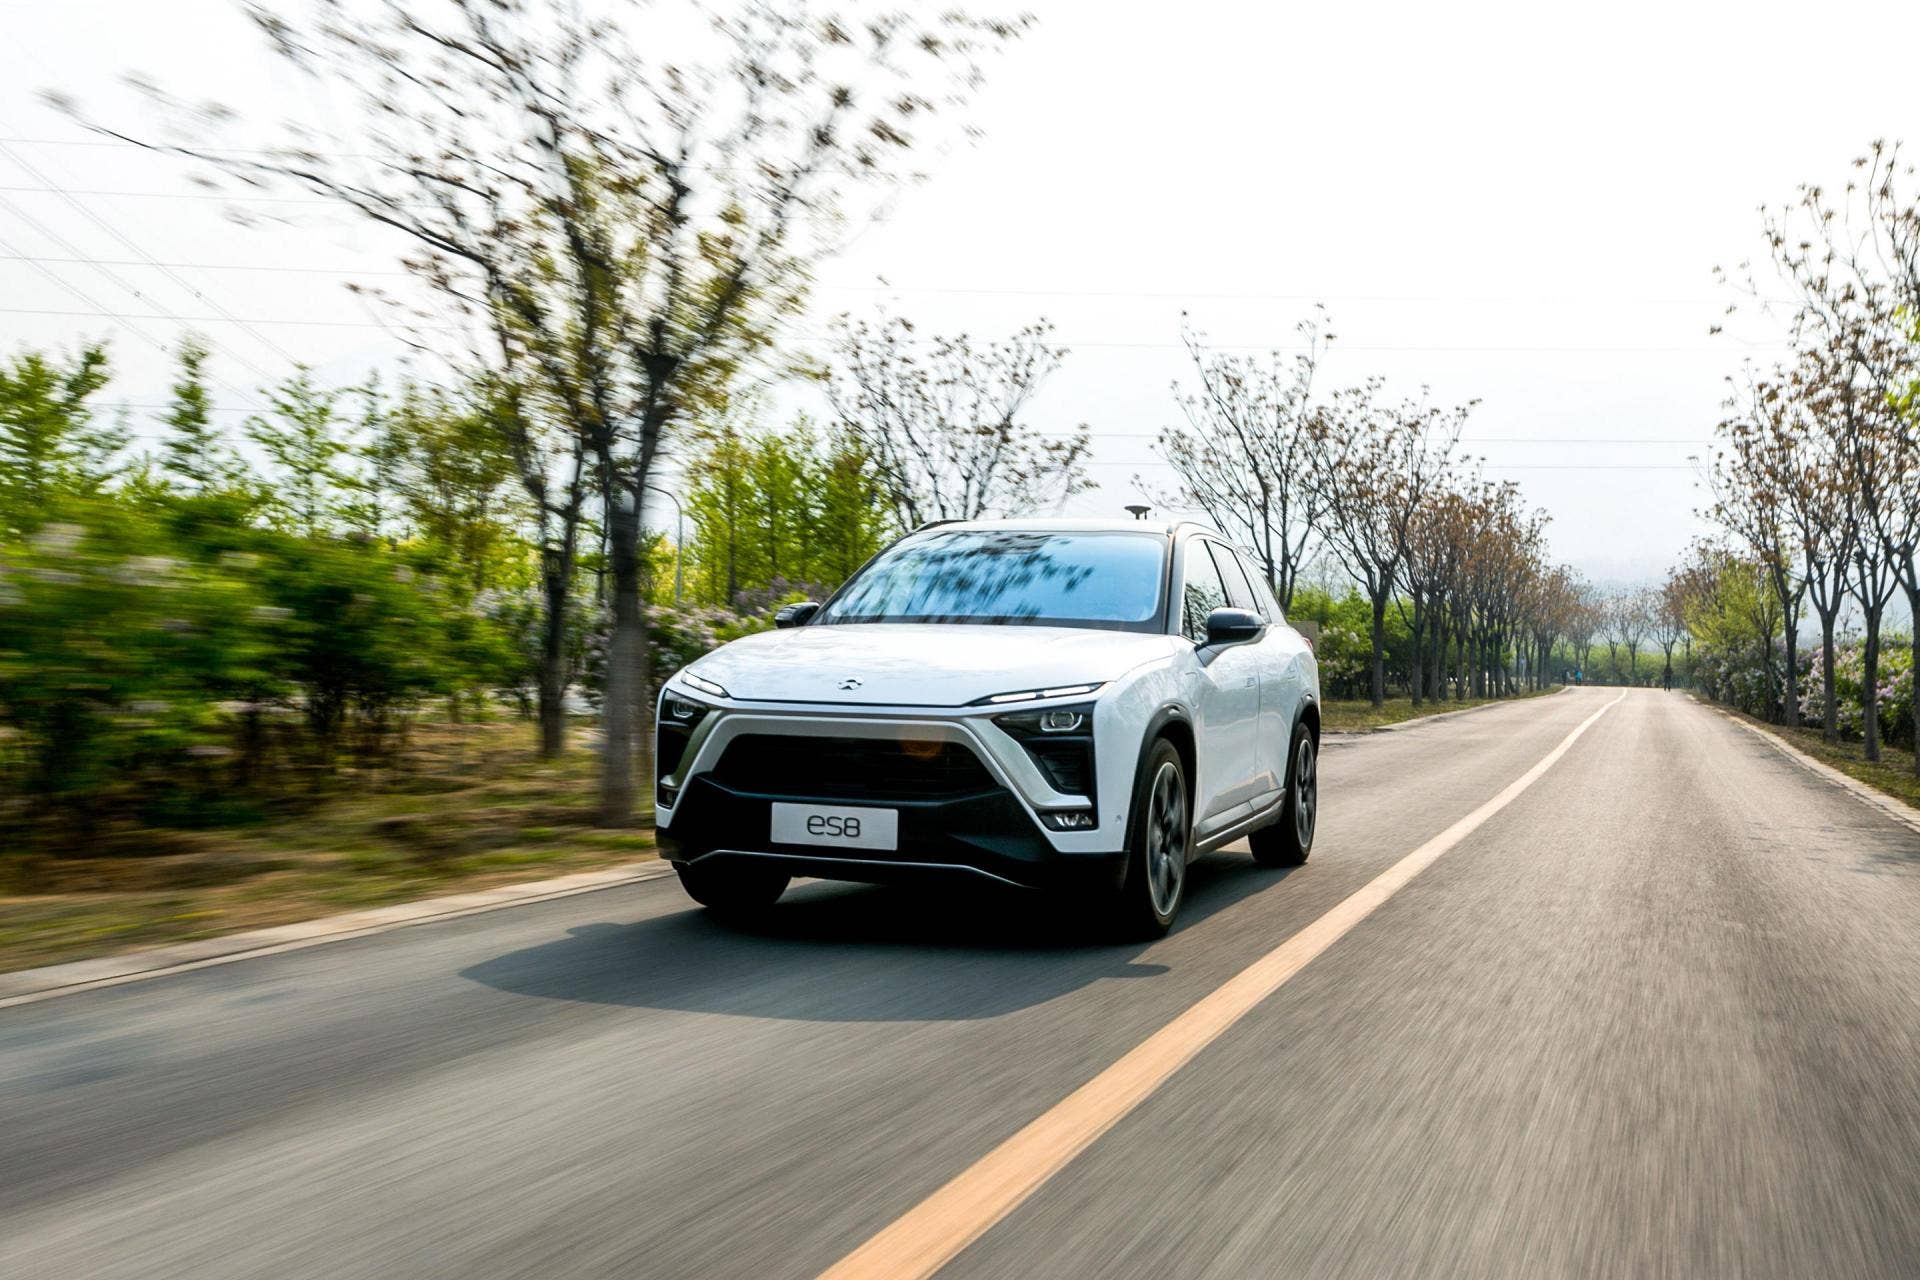 Nio To Eliminate 21% Of Global Workforce As Q2 Loss Widens, August Deliveries Miss Mark